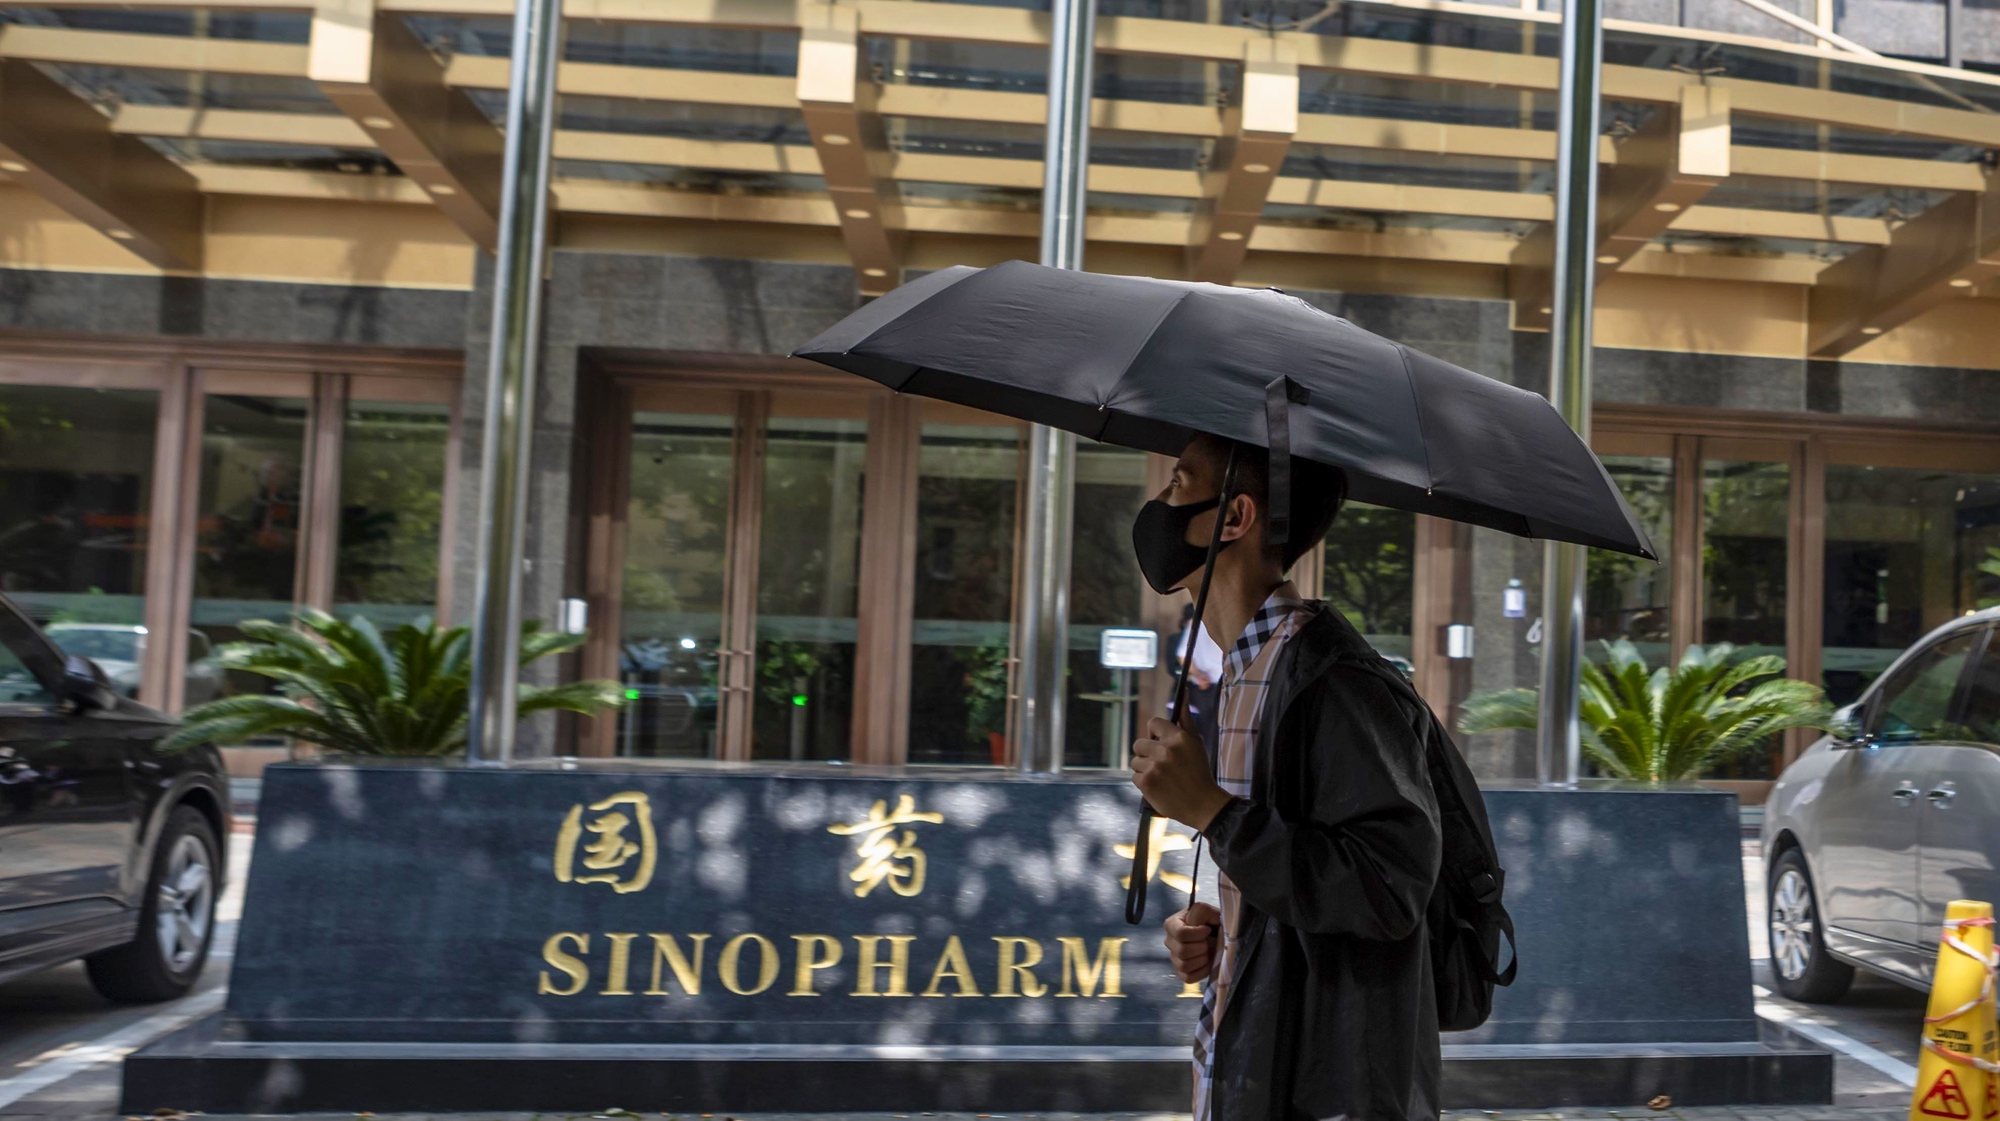 epa08628128 A man walks in front of the Sinopharm headquarters in Shanghai, China, 25 August 2020 (issued 27 August 2020). According to media reports, Sinopharm, major state-owned Chinese pharmaceutical company, plans to have a COVID-19 vaccine on the market by the end of 2020.  EPA/ALEX PLAVEVSKI